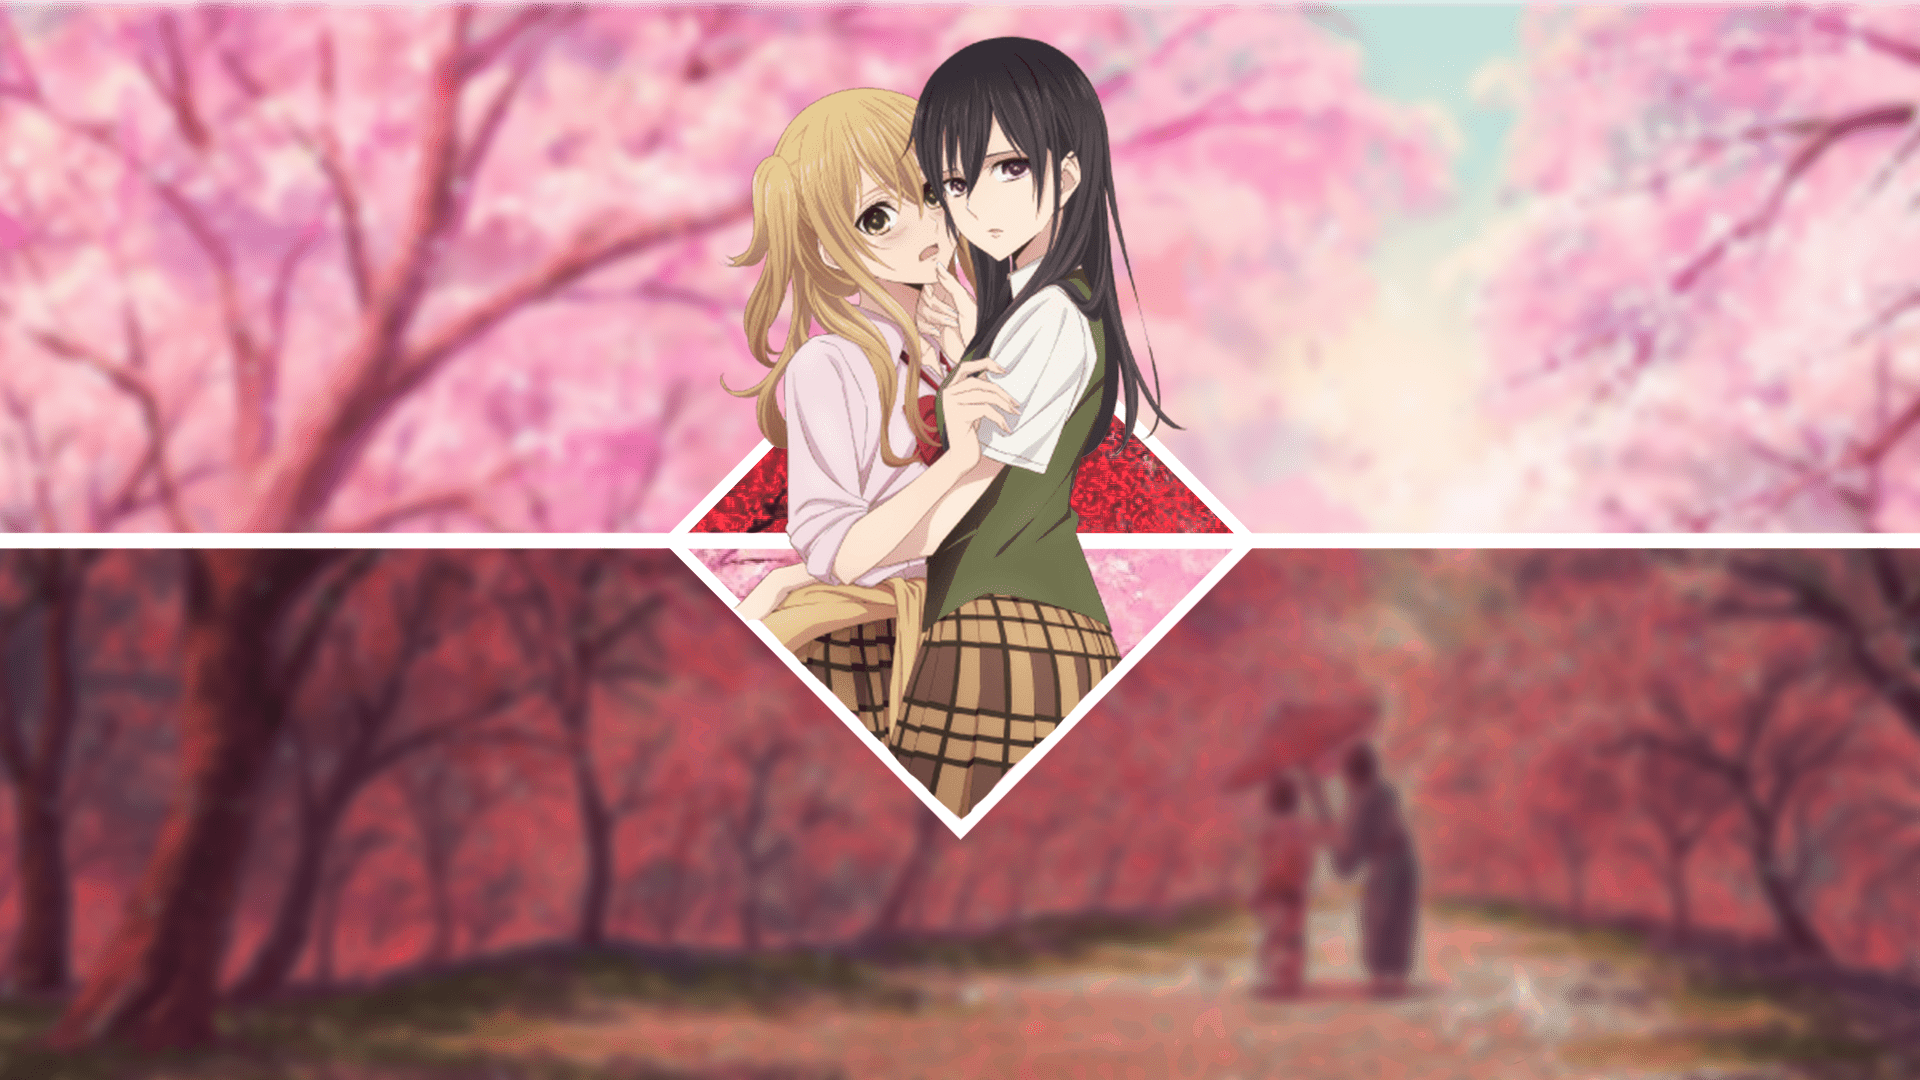 Citrus Anime Wallpapers Top Free Citrus Anime Backgrounds